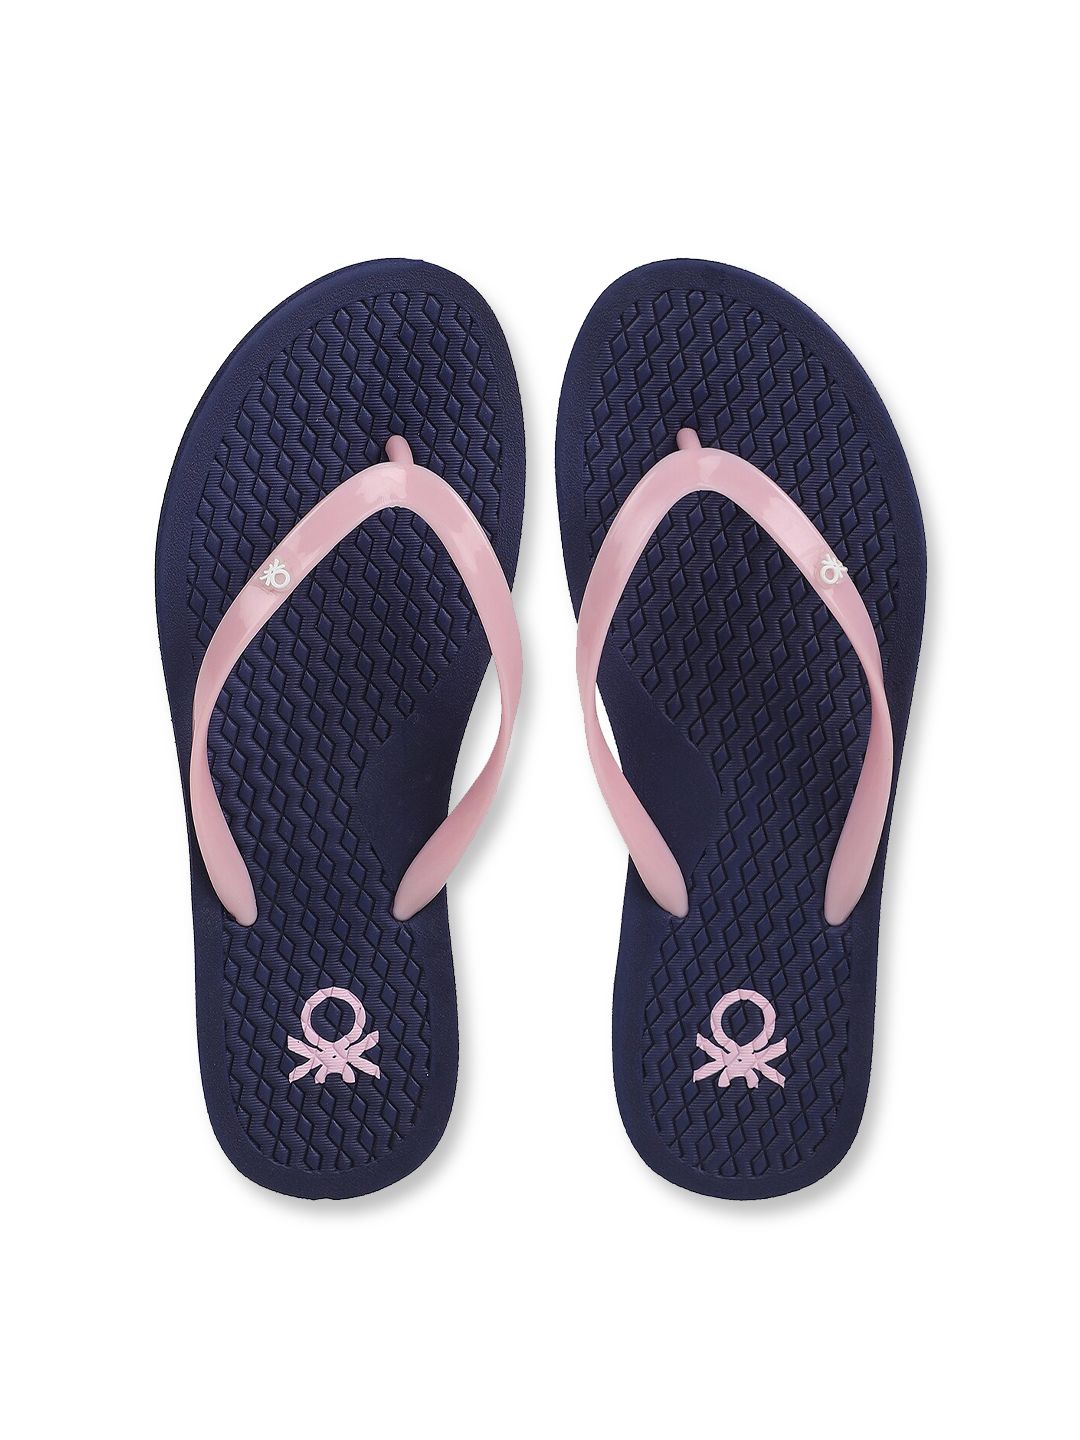 United Colors of Benetton Women Pink & Navy Blue Rubber Thong Flip-Flops Price in India